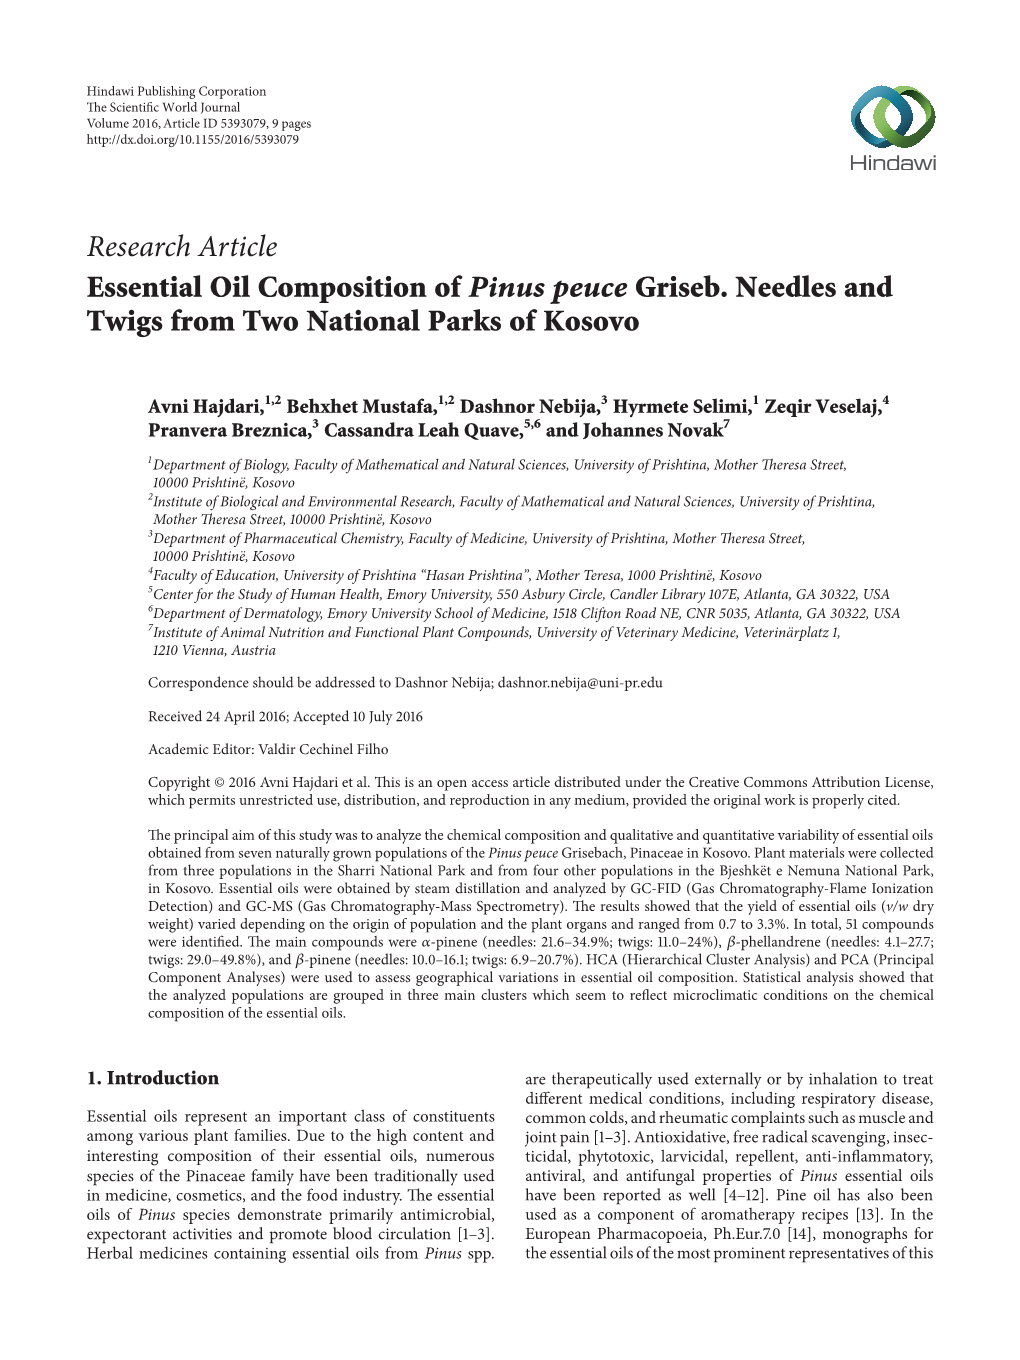 Research Article Essential Oil Composition of Pinus Peuce Griseb